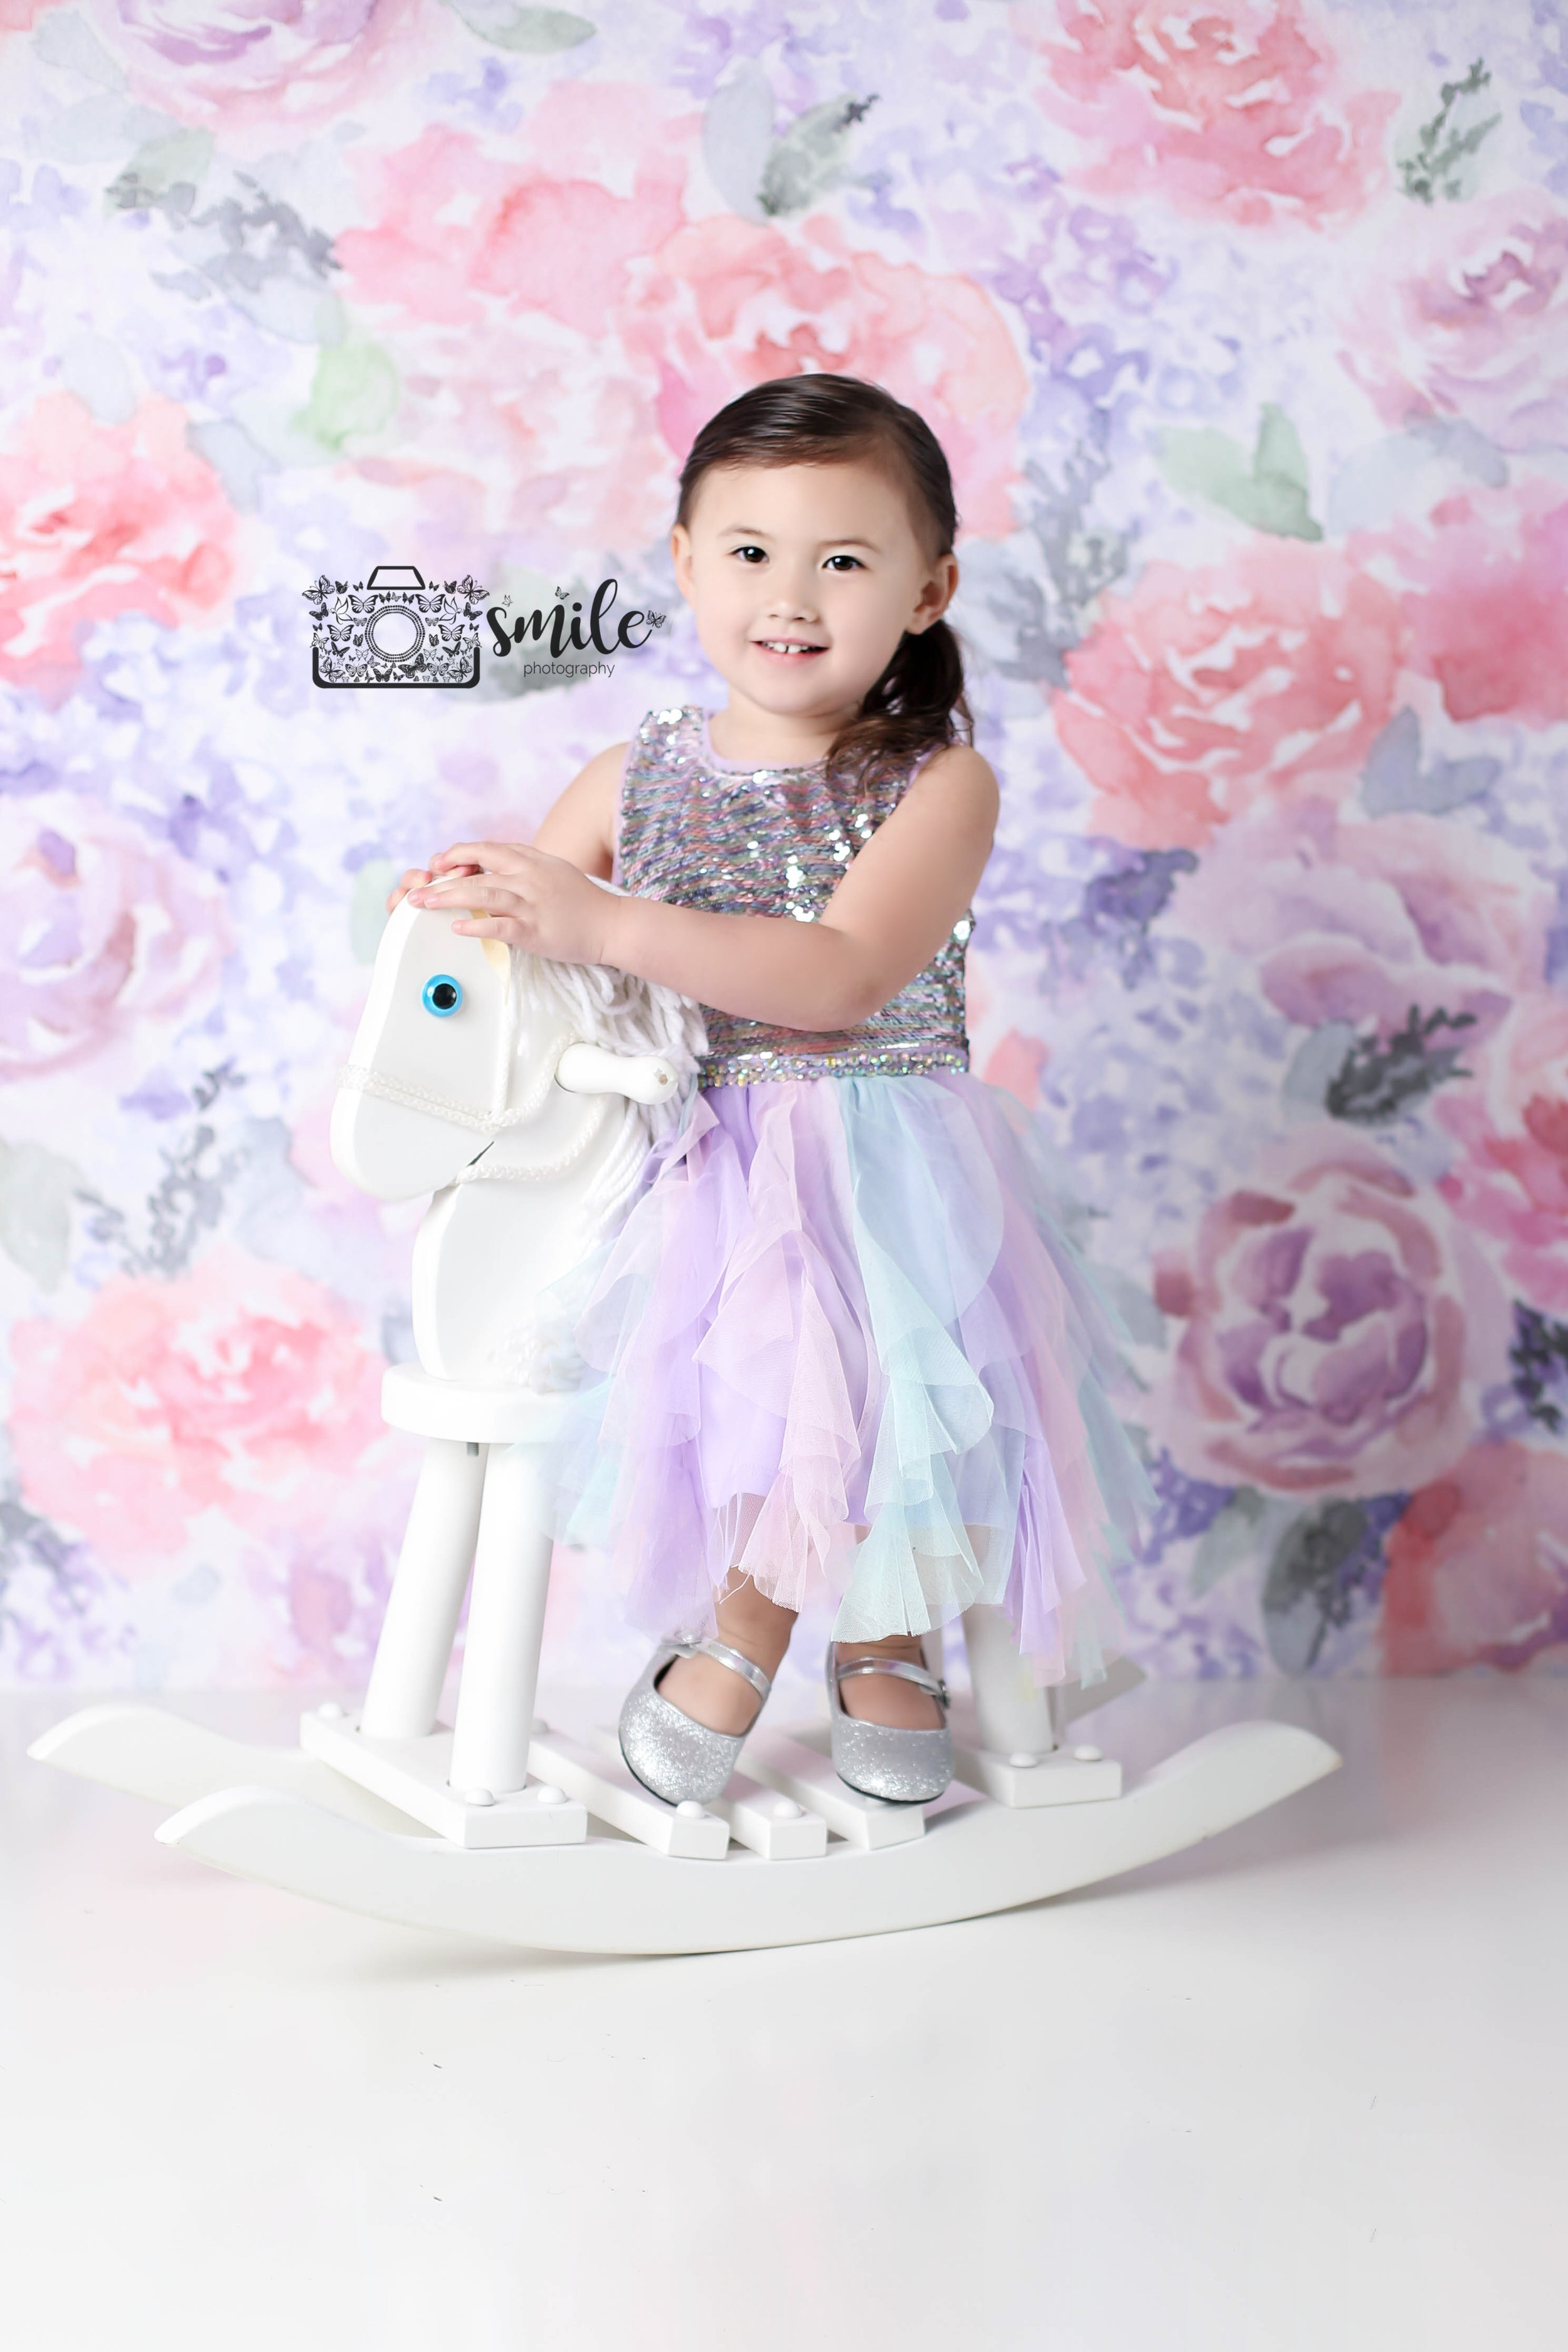 Ocean County Photographer Jersey Shore Child Photography